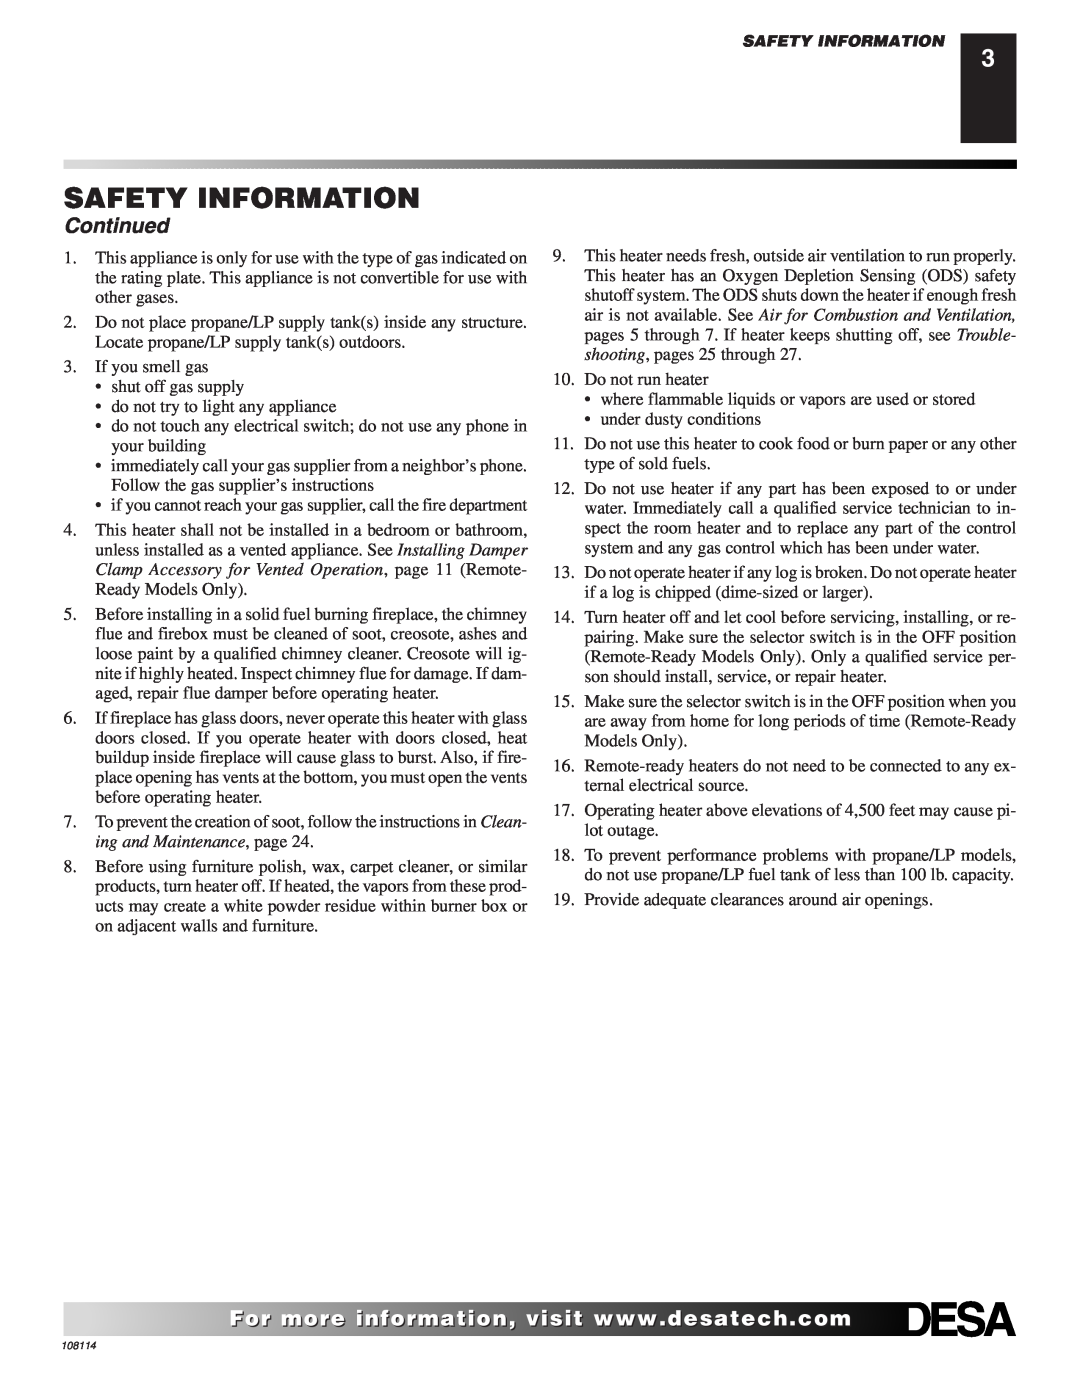 Desa INTERNATIONAL UNVENTED (VENT-FREE) GAS LOG HEATER installation manual Continued, Safety Information 